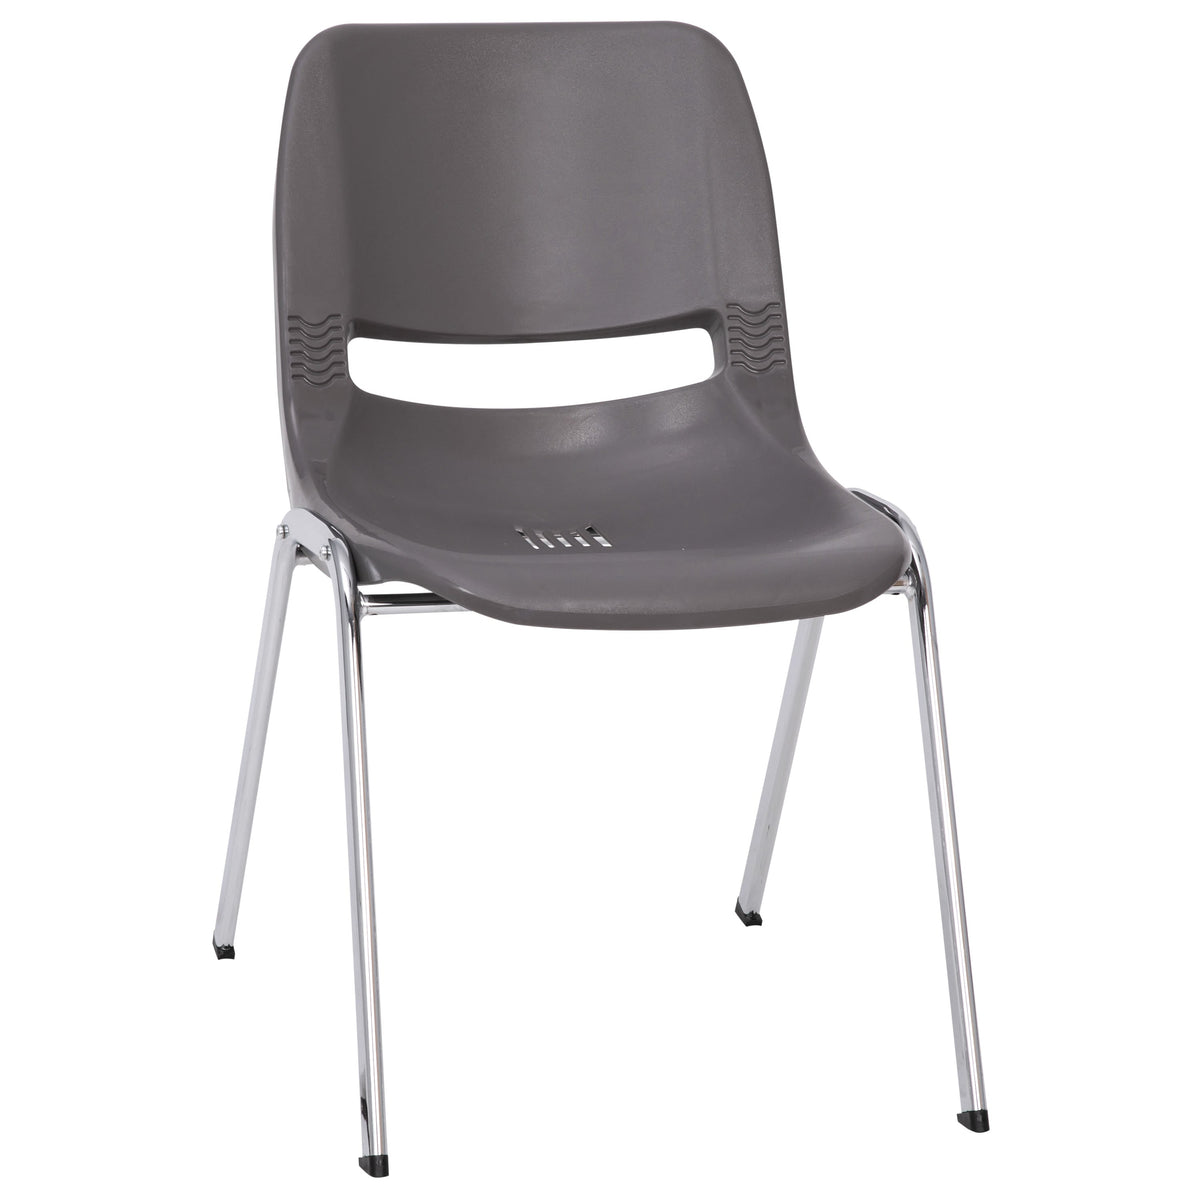 Gray Plastic/Chrome Frame |#| 880 lb. Capacity Gray Shell Stack Chair with Chrome Frame and 18inch Seat Height